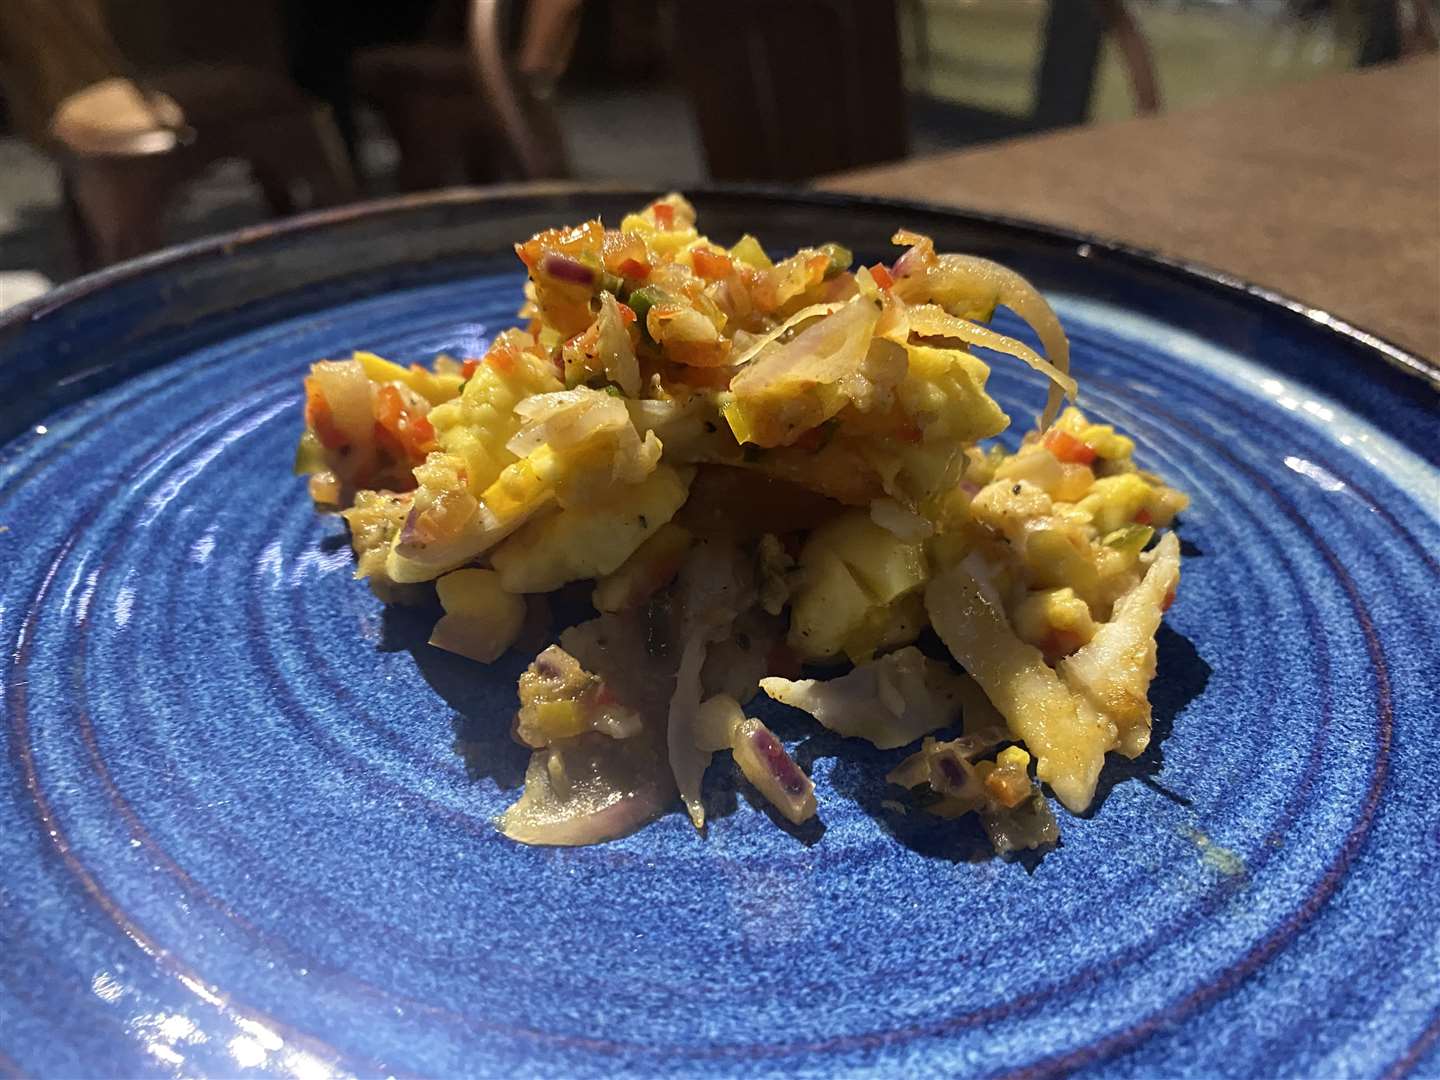 Ackee saltfish at £7 for a starter-size portion is definitely something to order again